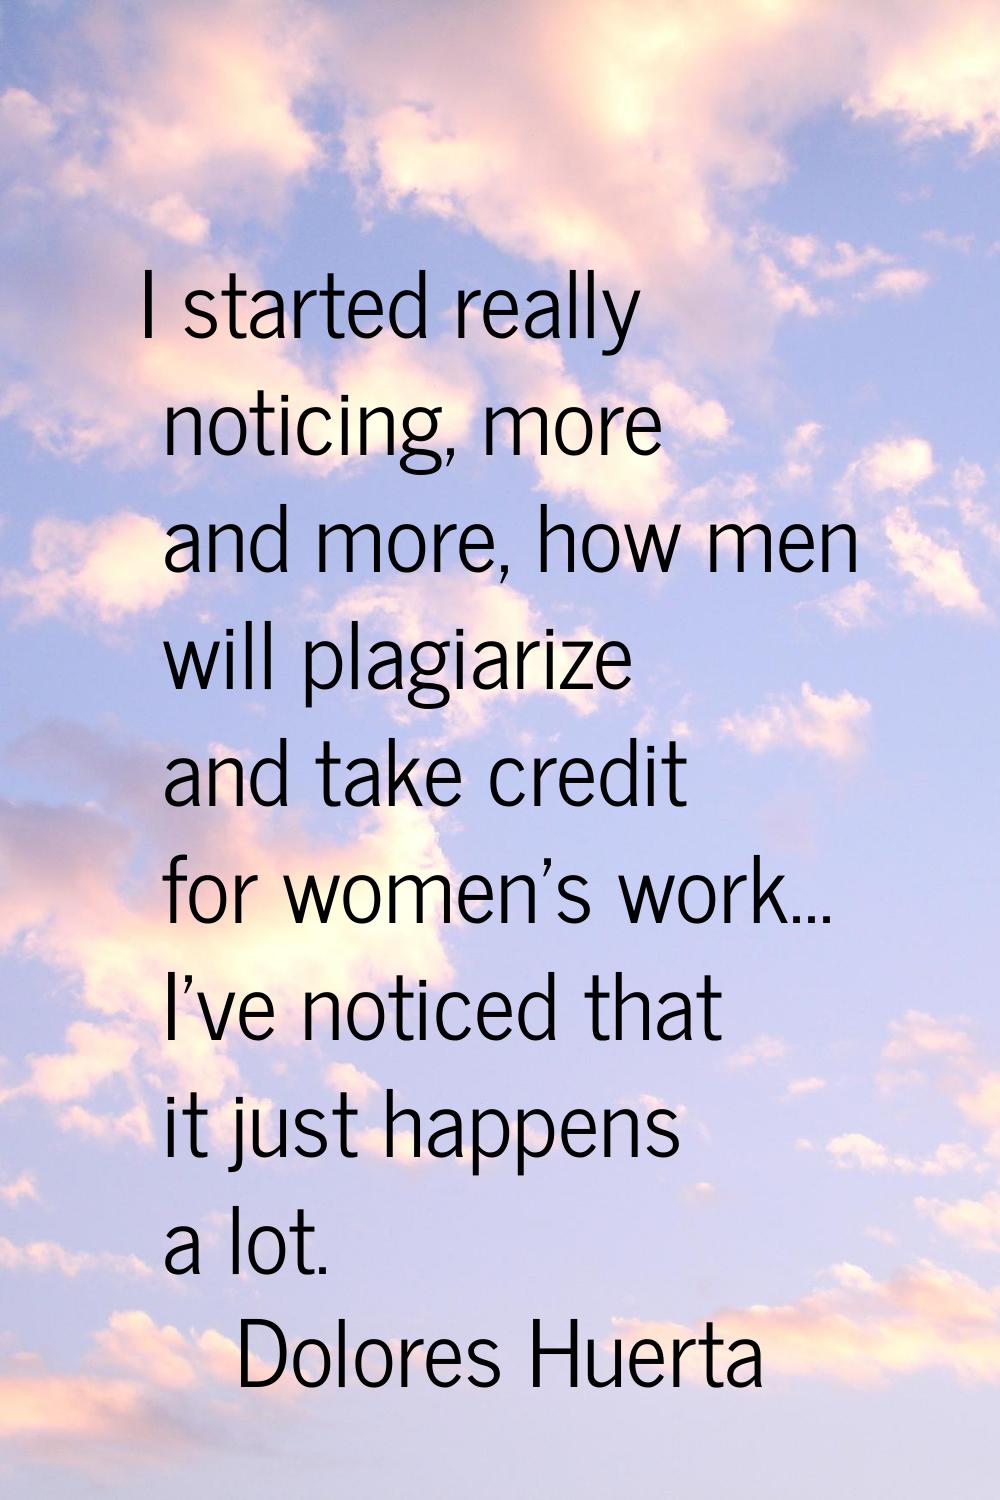 I started really noticing, more and more, how men will plagiarize and take credit for women's work.